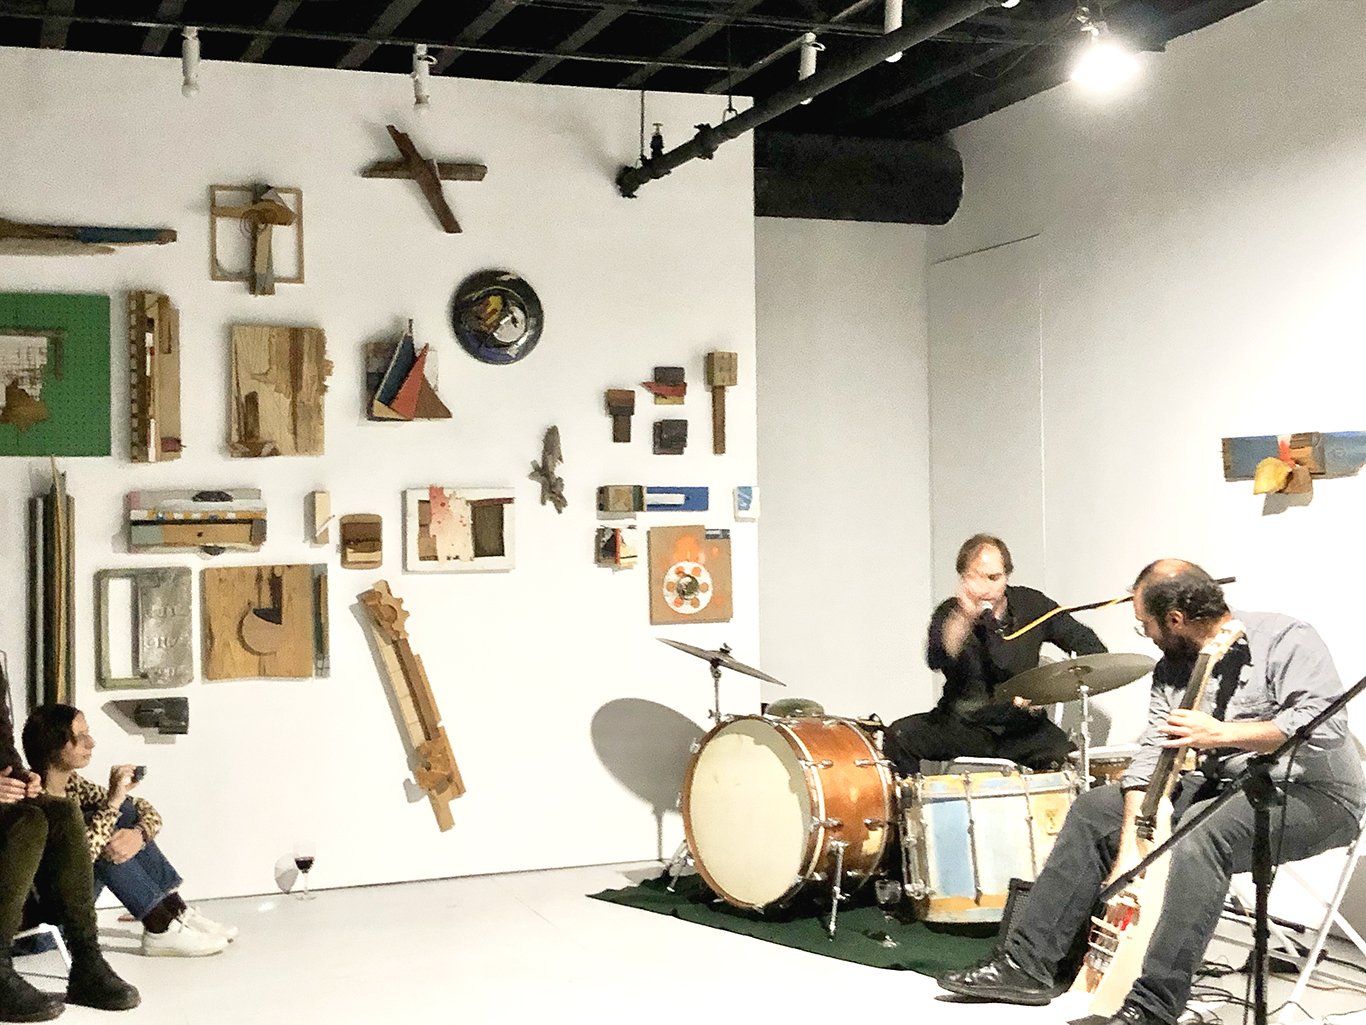 UNDERCURRENT MAIN WALL INSTALLATION with MUSICIANS